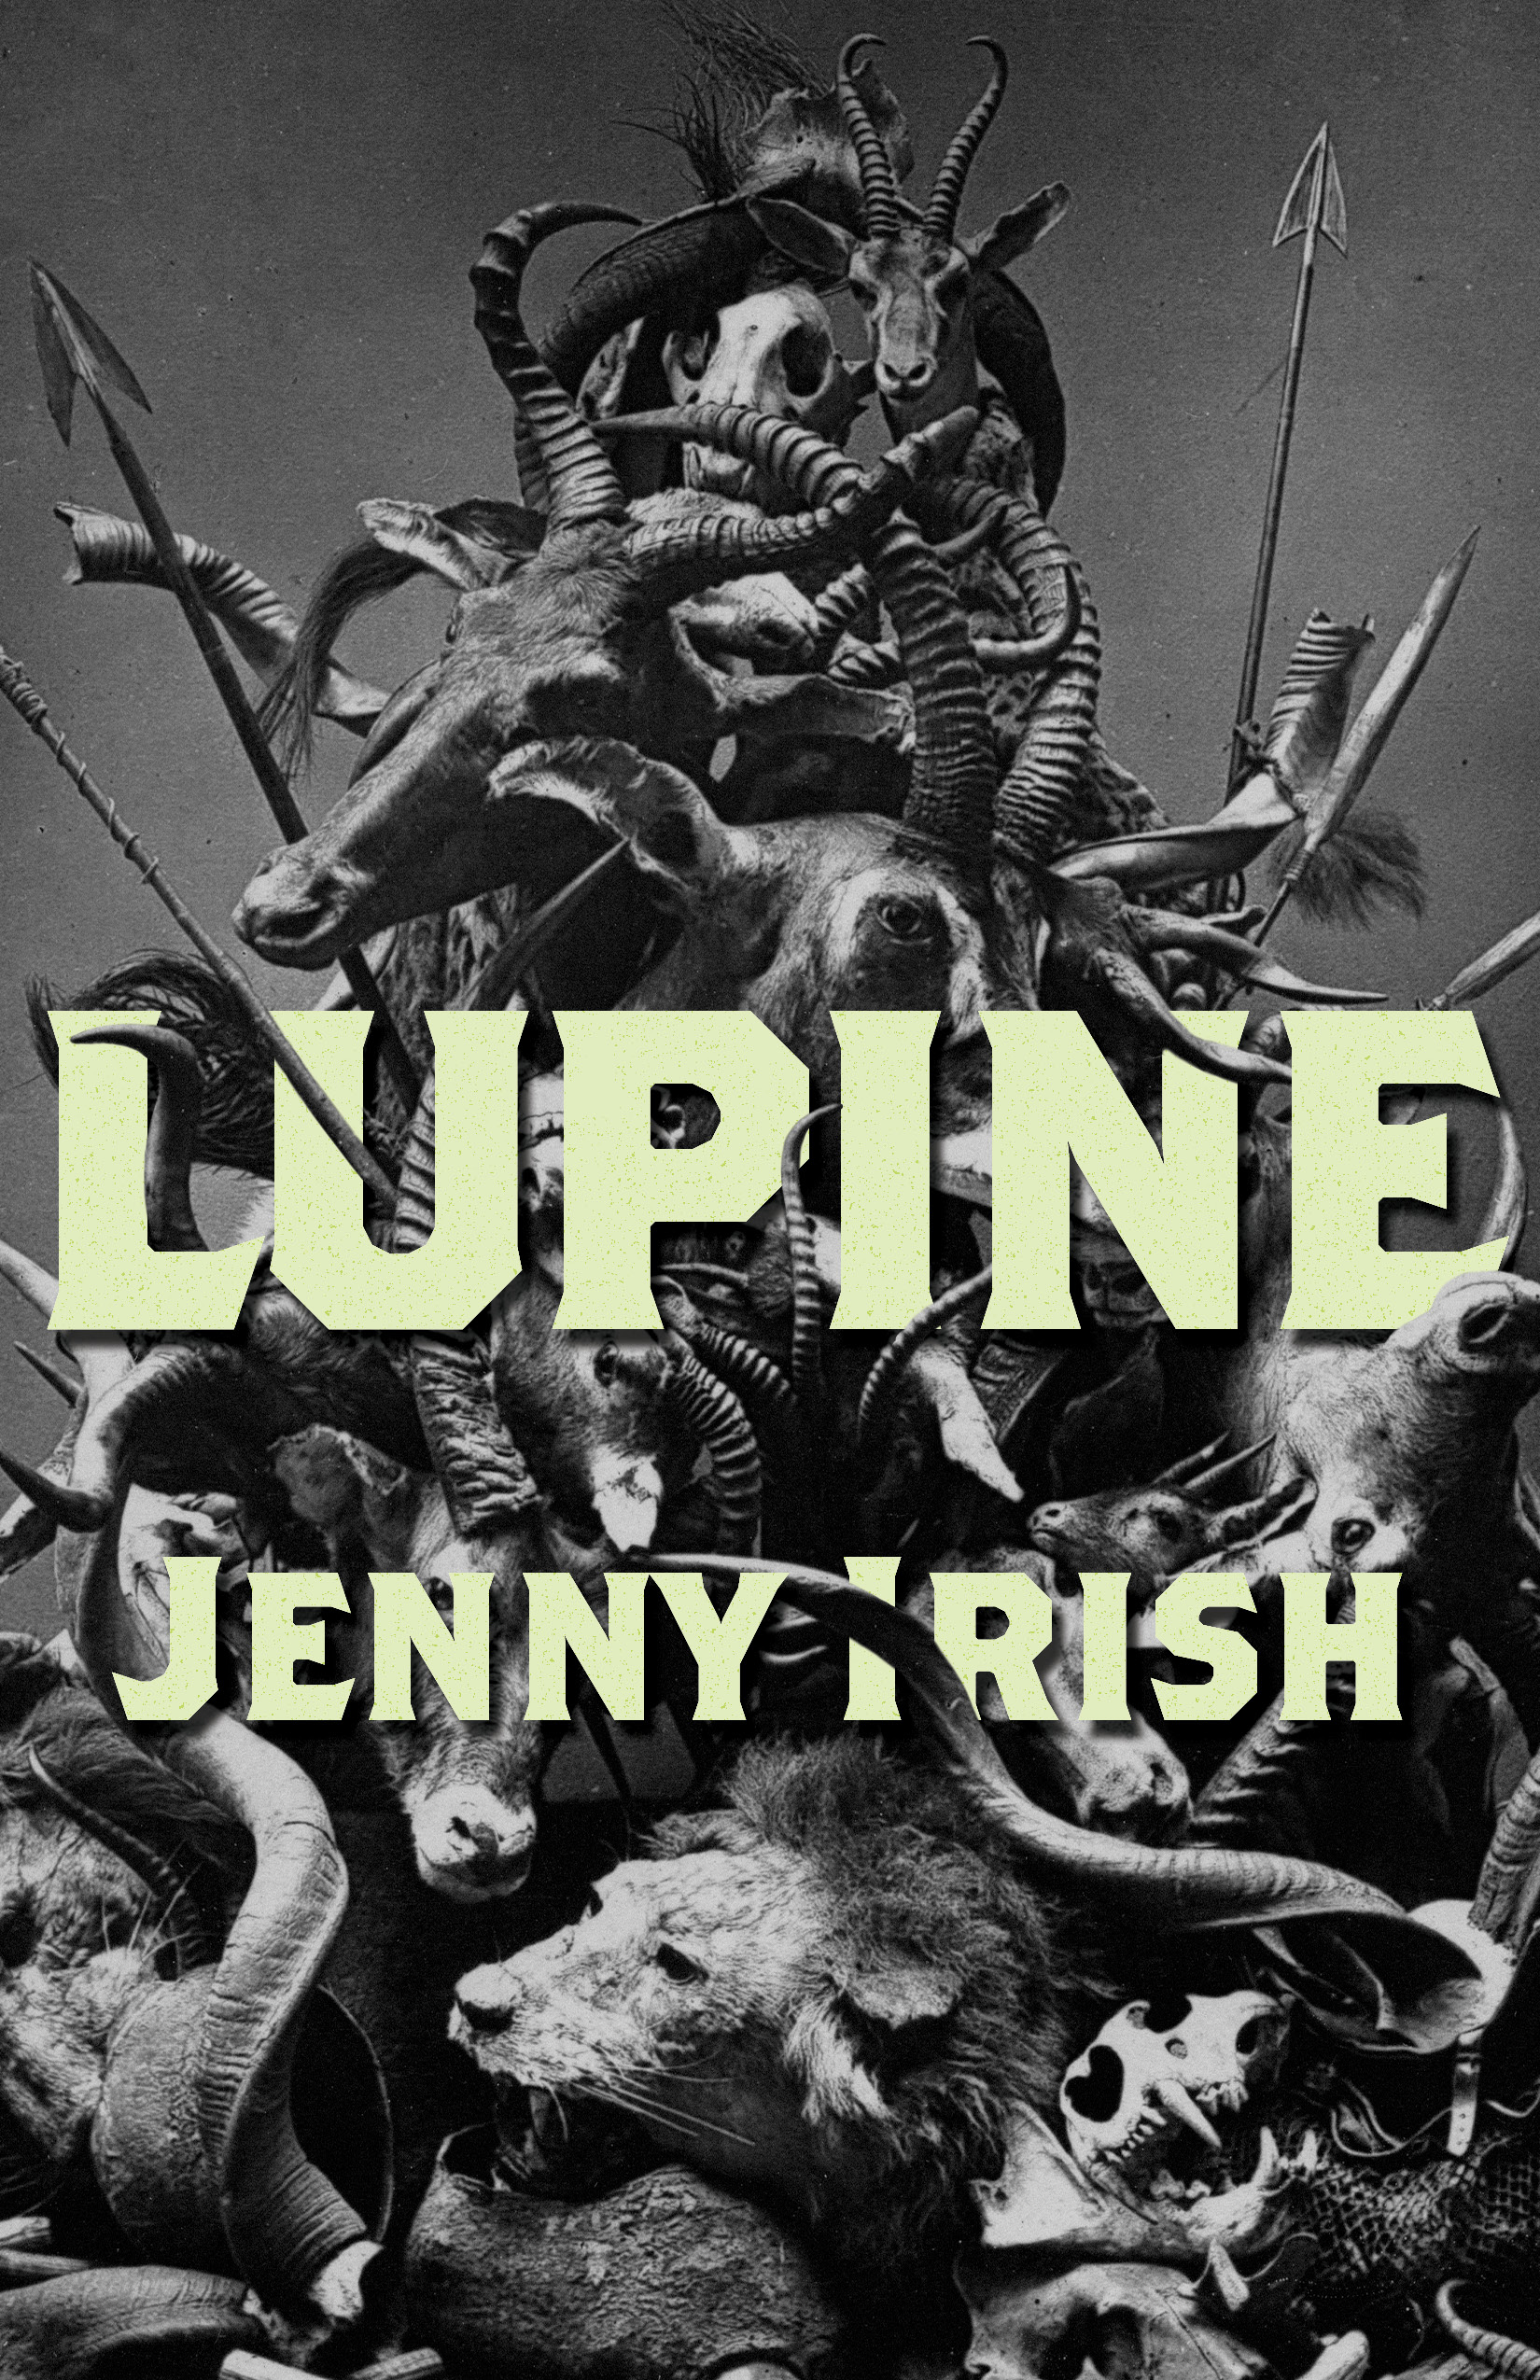 Jenny Irish's new book, Lupine, comes out in March